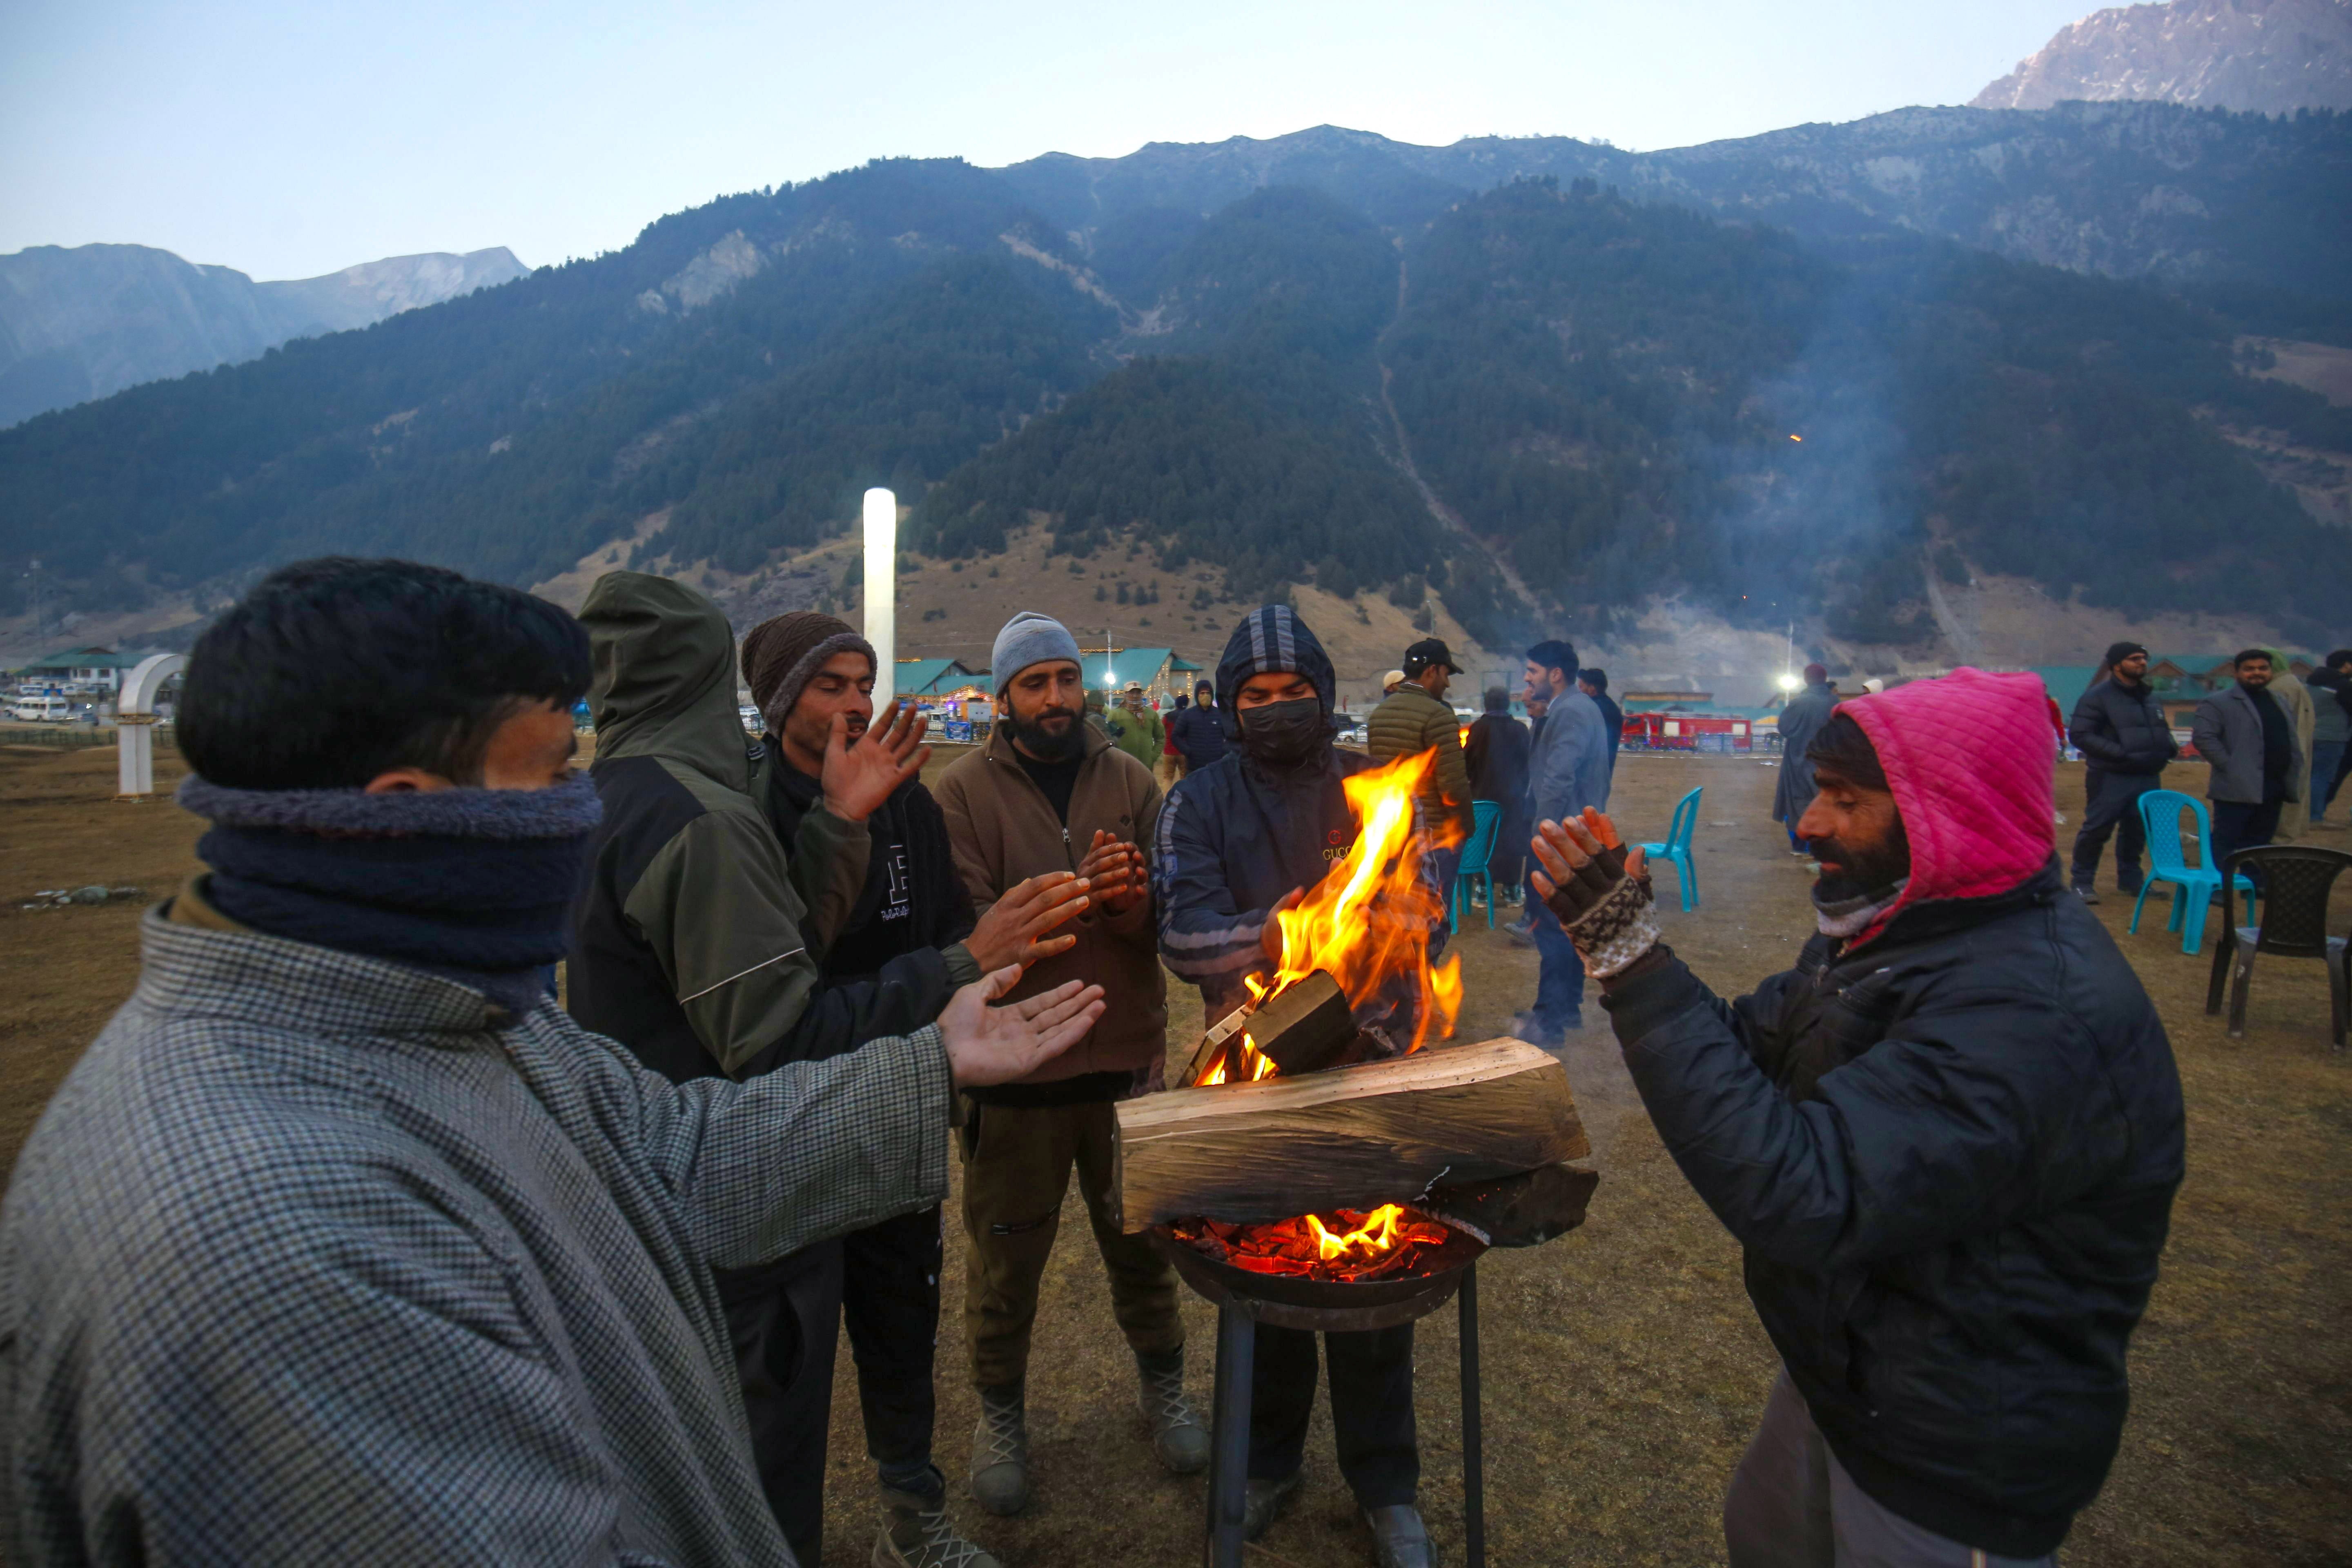 

<p>People warm themselves near a small fire as they attend the celebrations in Sonamarg, Indian Kashmir </p>
<p>” height=”3840″ width=”5760″ layout=”responsive” i-amphtml-layout=”responsive”><i-amphtml-sizer slot=